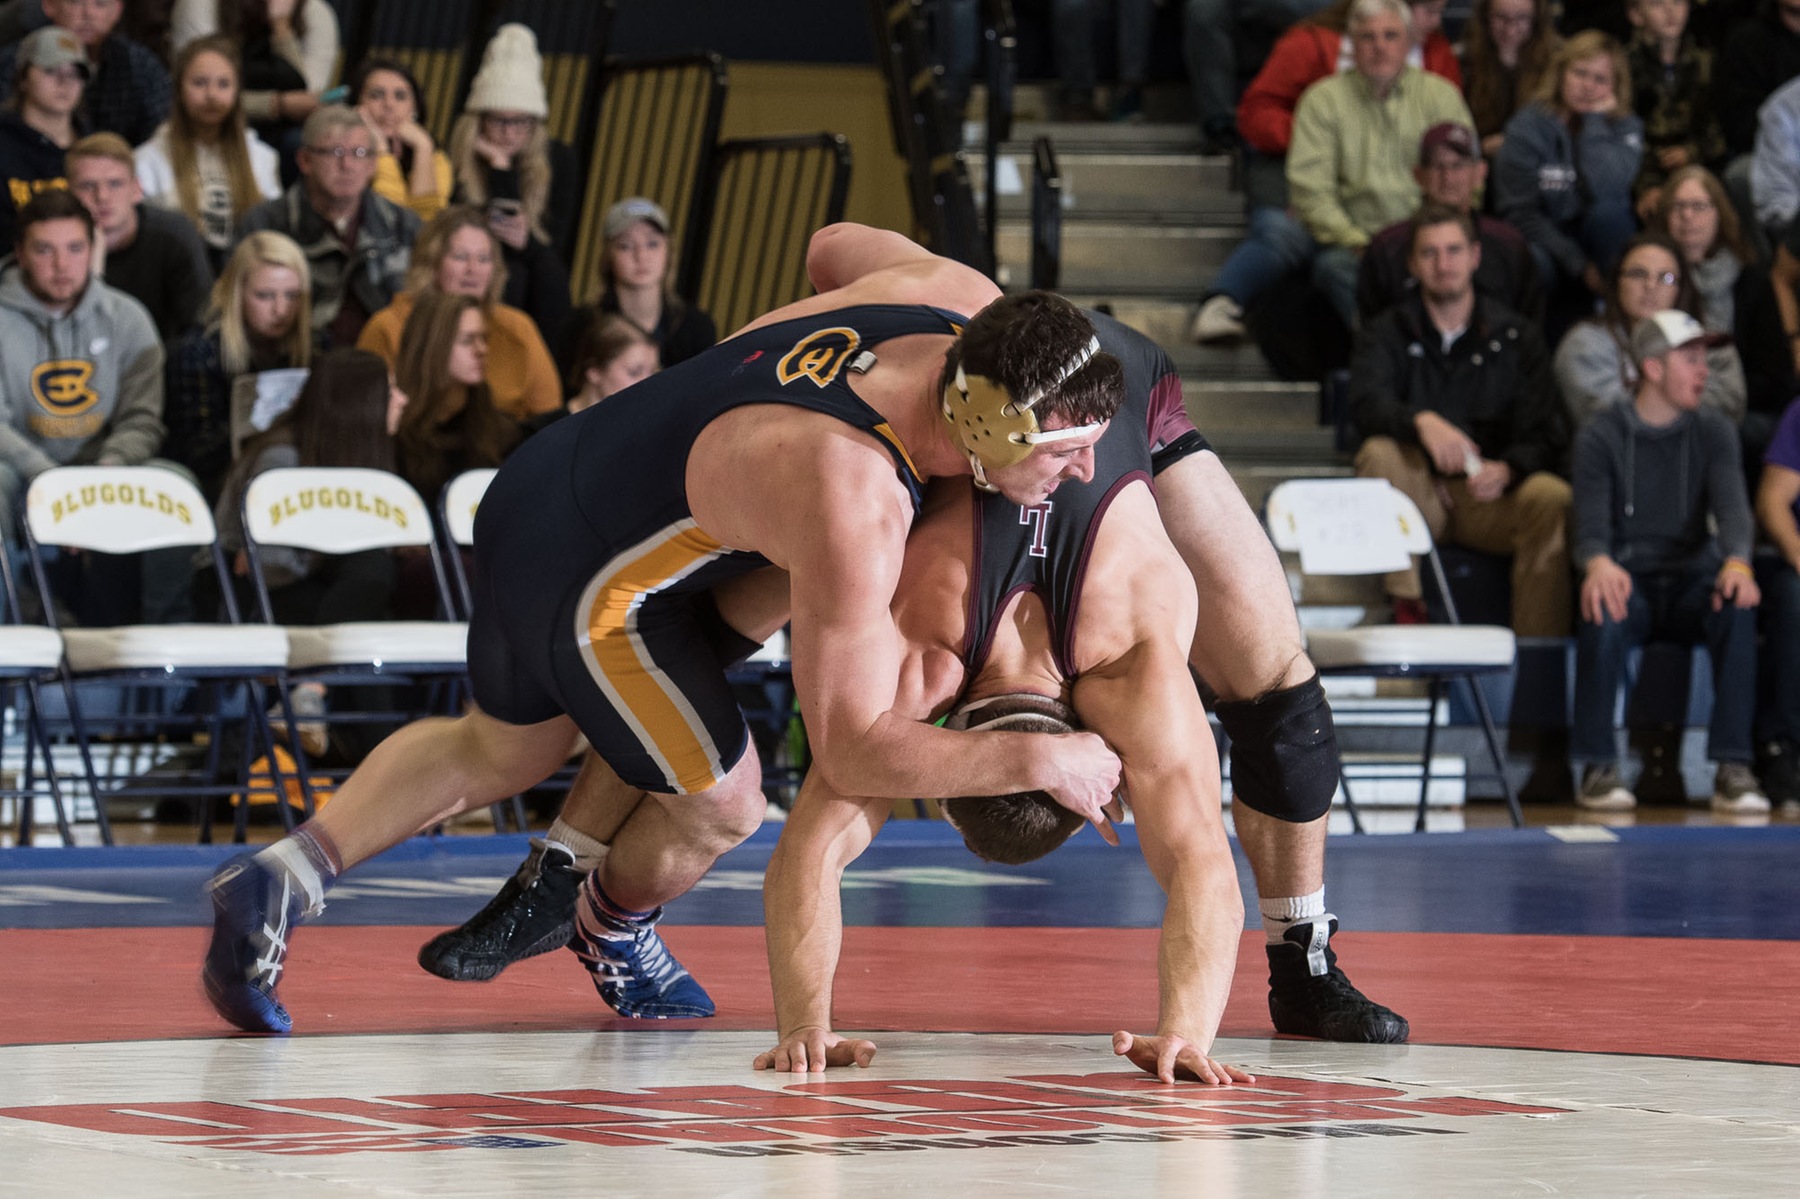 Blugolds get second straight victory over Pointers wrestling